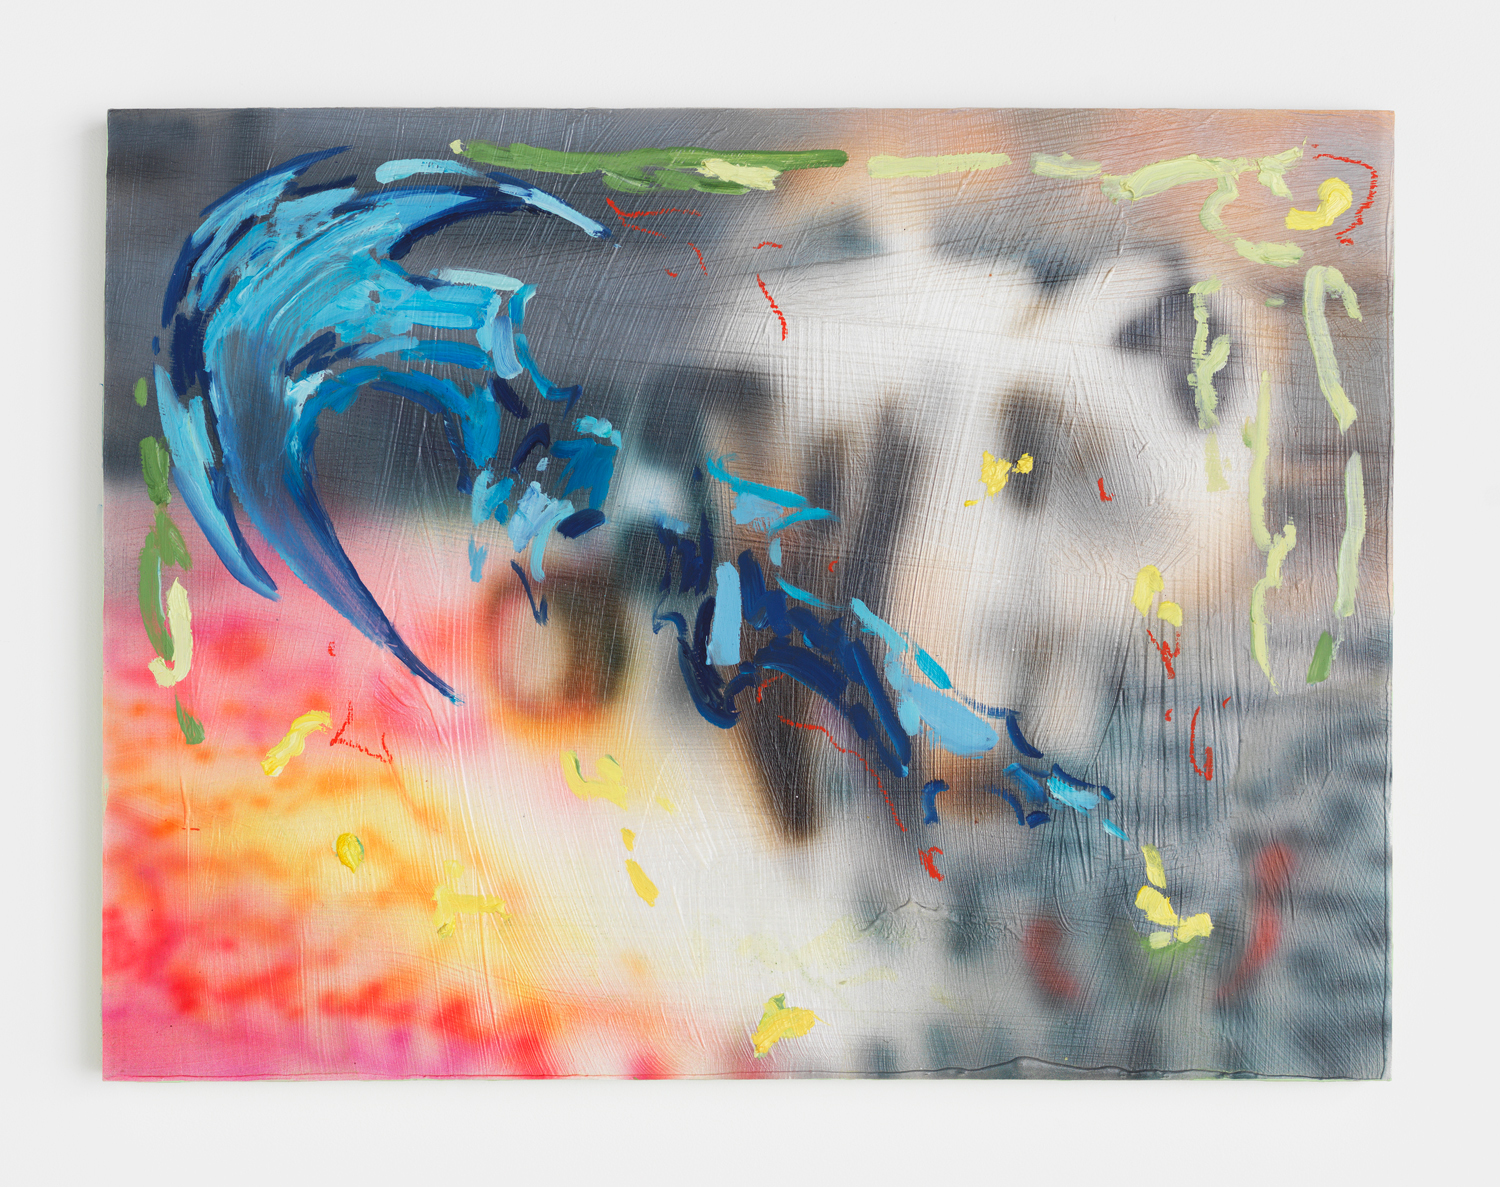 Rachel Rossin, Kitten and Scythe, 2021, Oil and airbrushed acrylic on panel, 18h x 24w in.